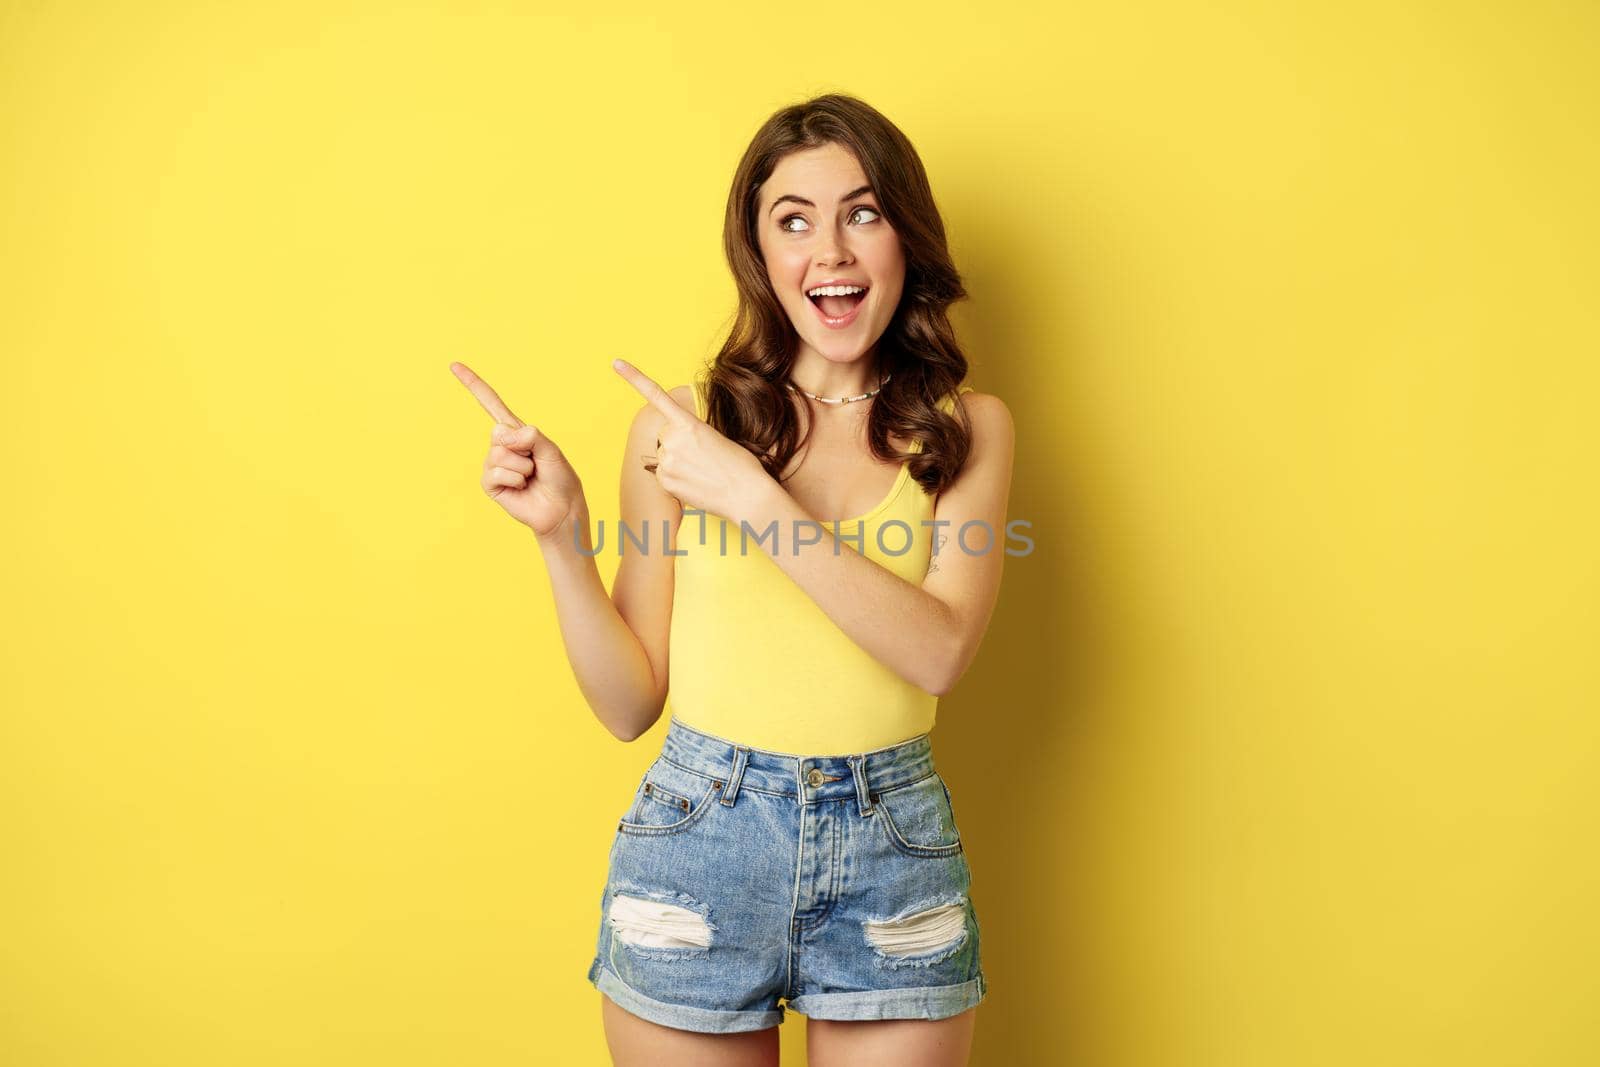 Portrait of stylish summer girl, brunette woman showing way, pointing fingers left, advertising, standing over yellow background. Copy space